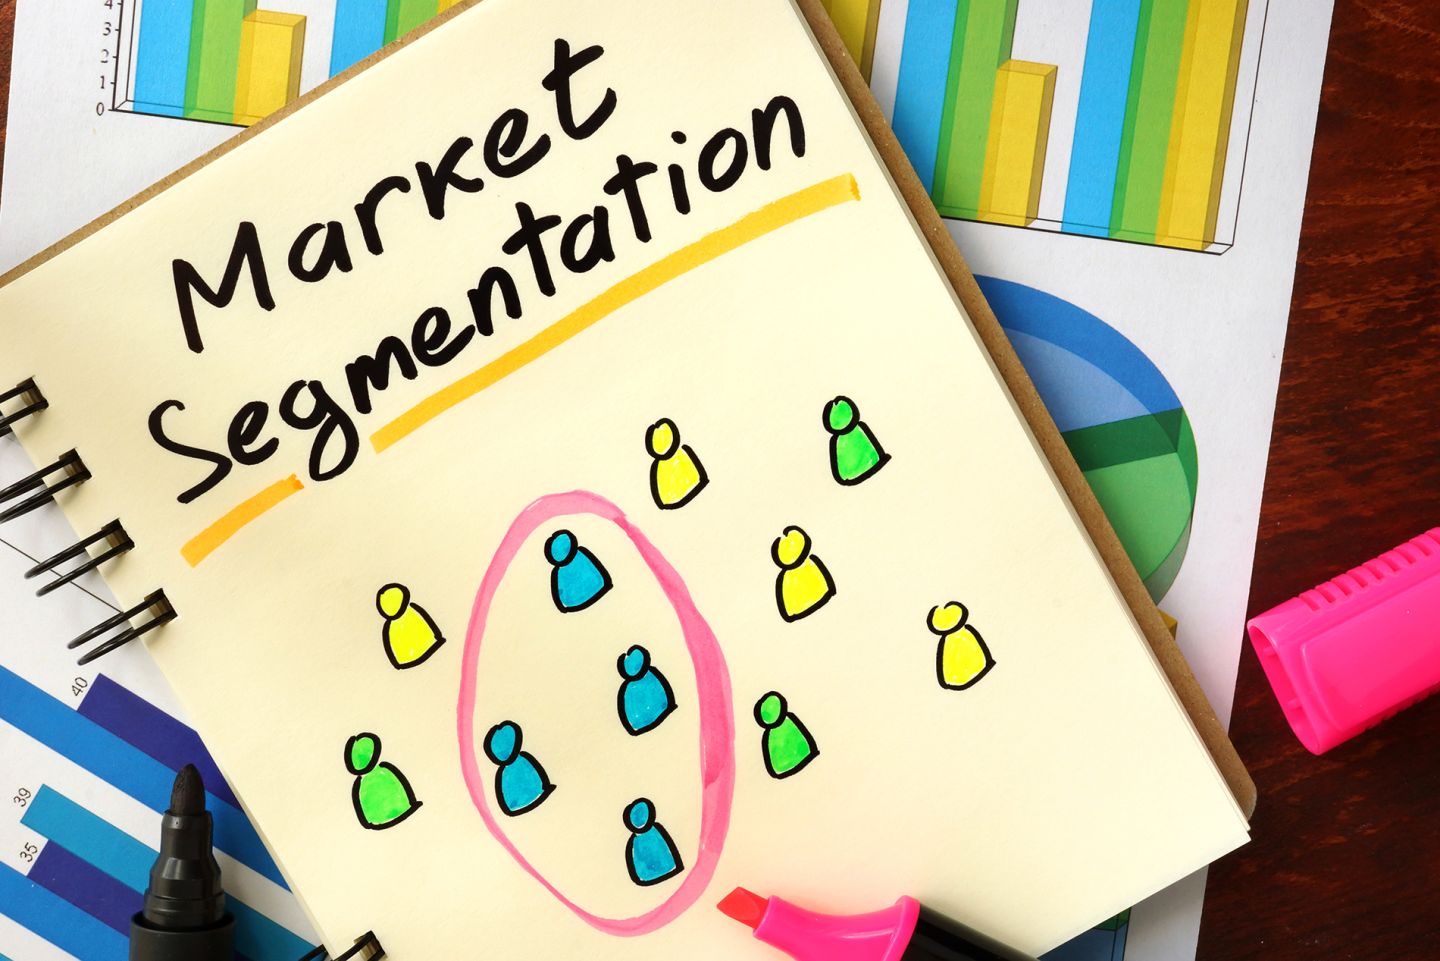 Beyond National Segments: A Look at Marketing Segmentation in Healthcare Today